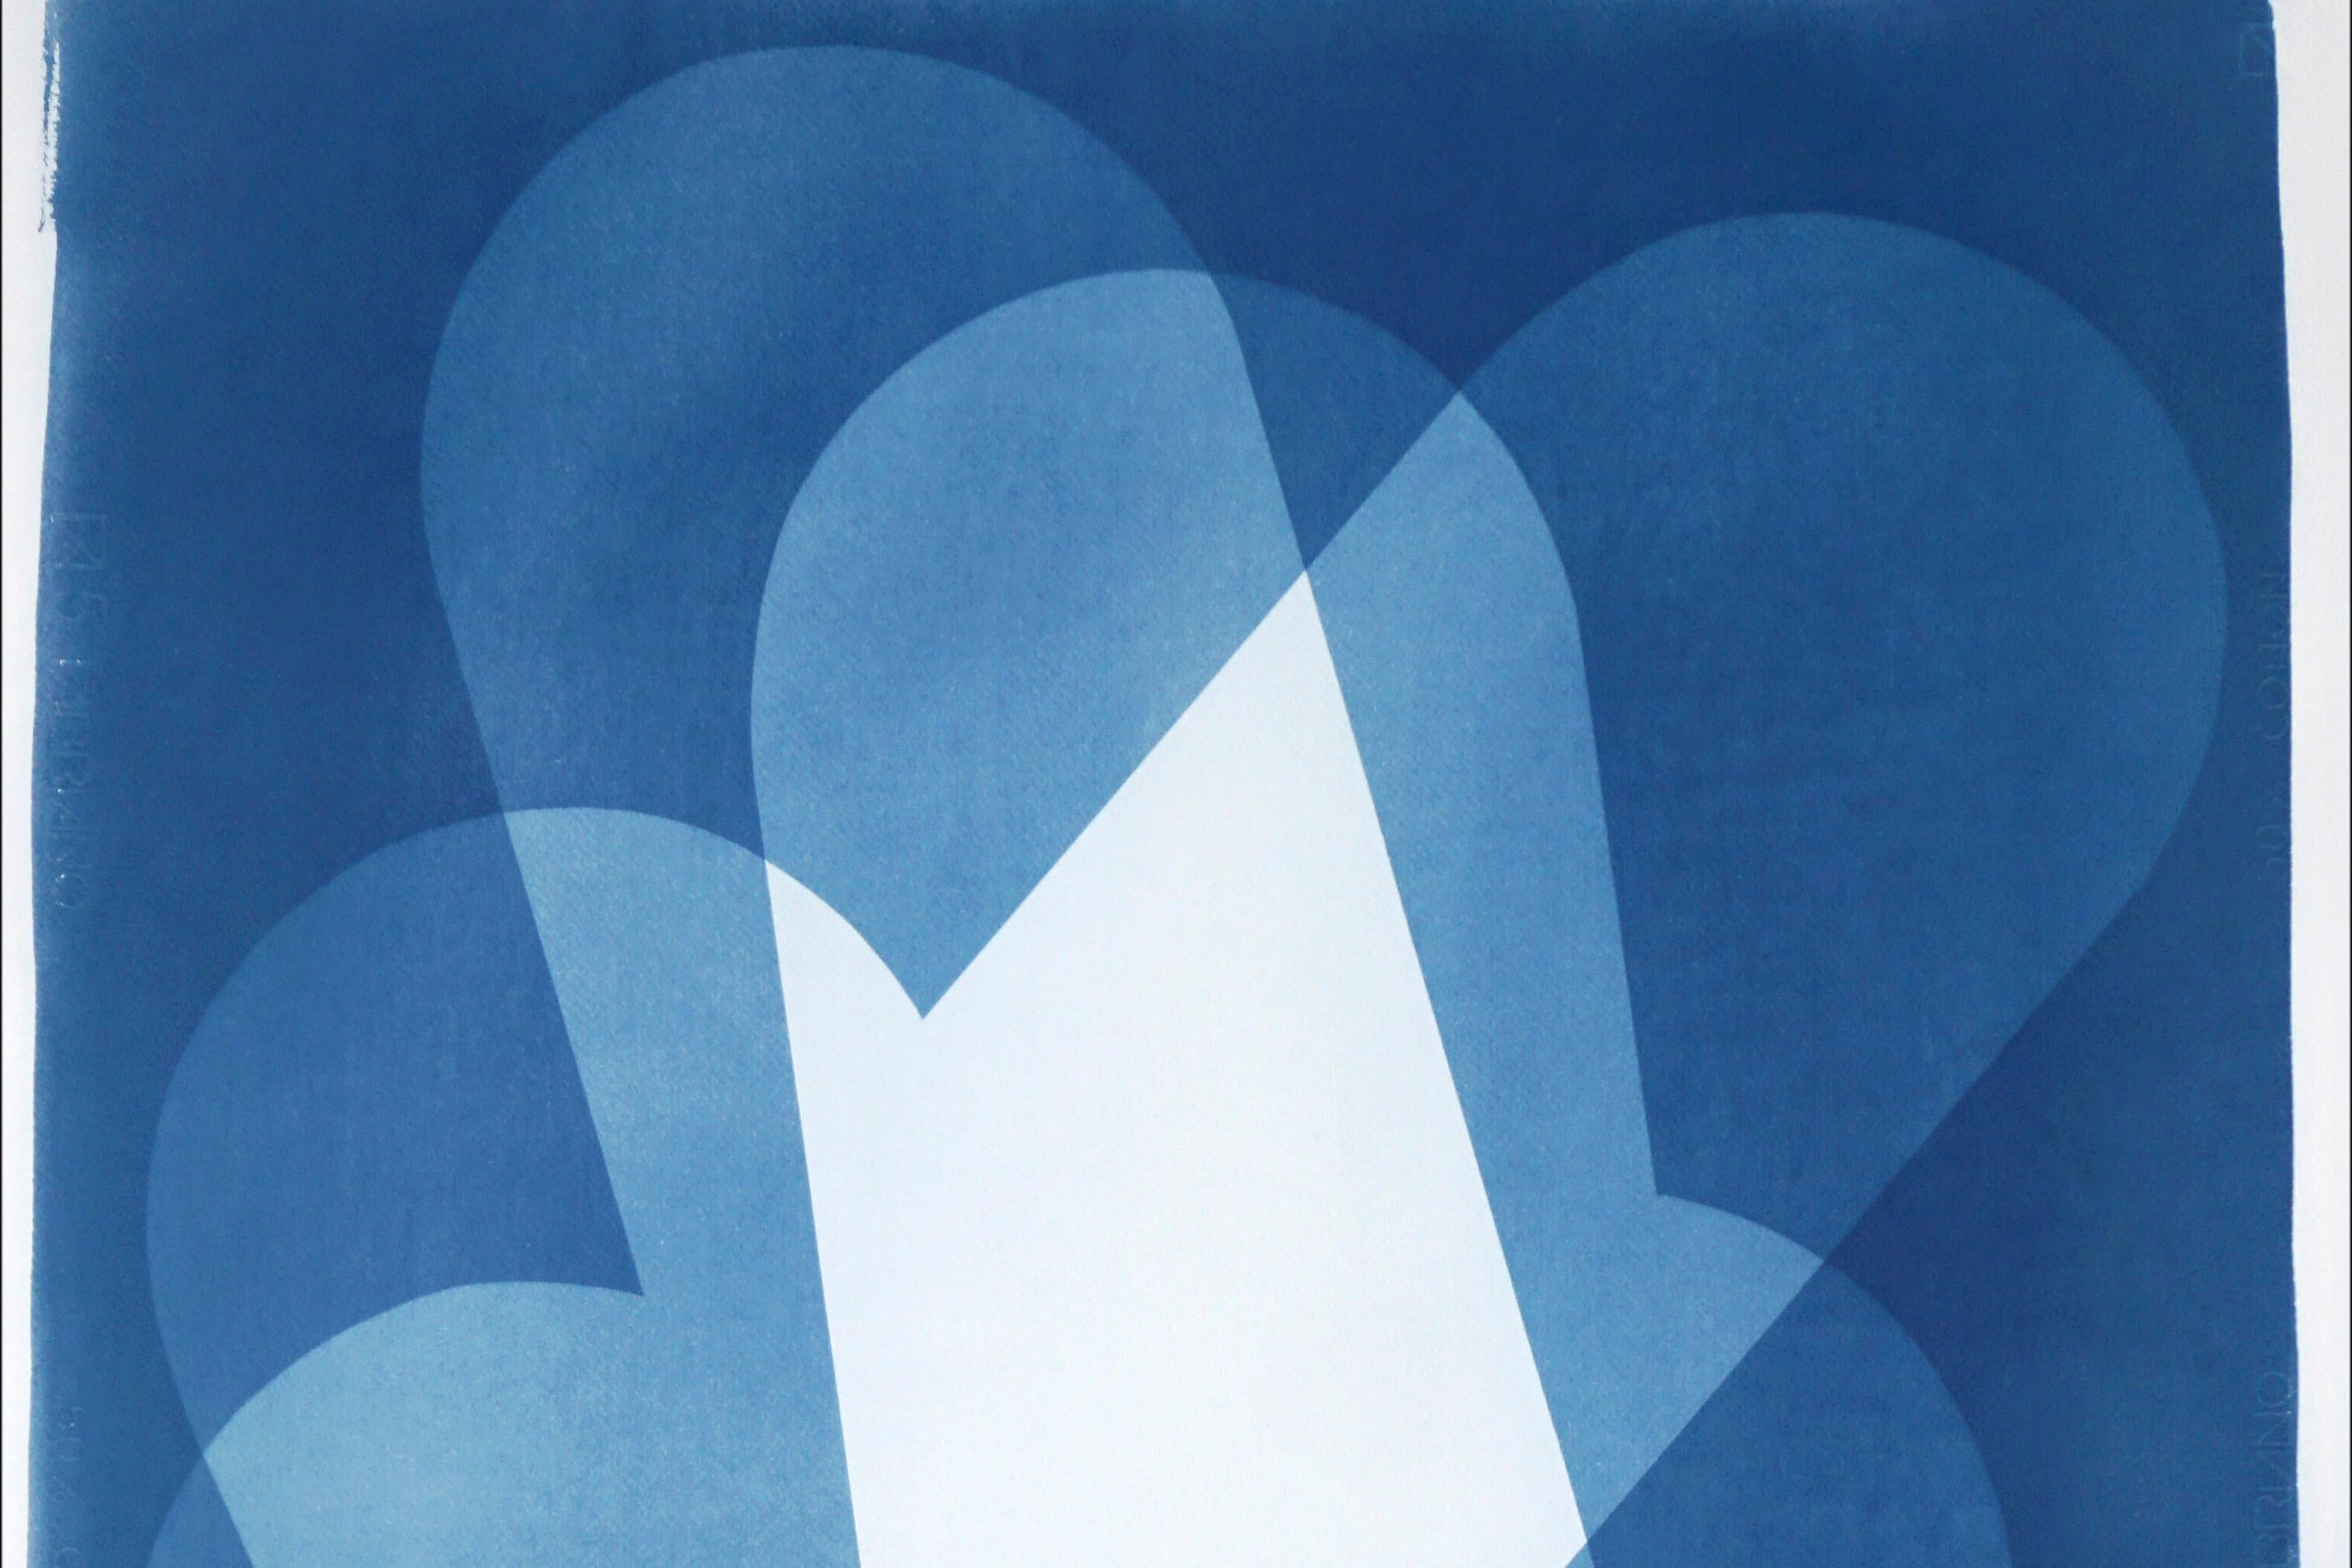 This is an exclusive handprinted unique cyanotype that takes its inspiration from the mid-century modern shapes.
It's made by layering paper cutouts and different exposures using uv-light. 

Details:
+ Title: Geometric Cloud
+ Year: 2022
+ Stamped